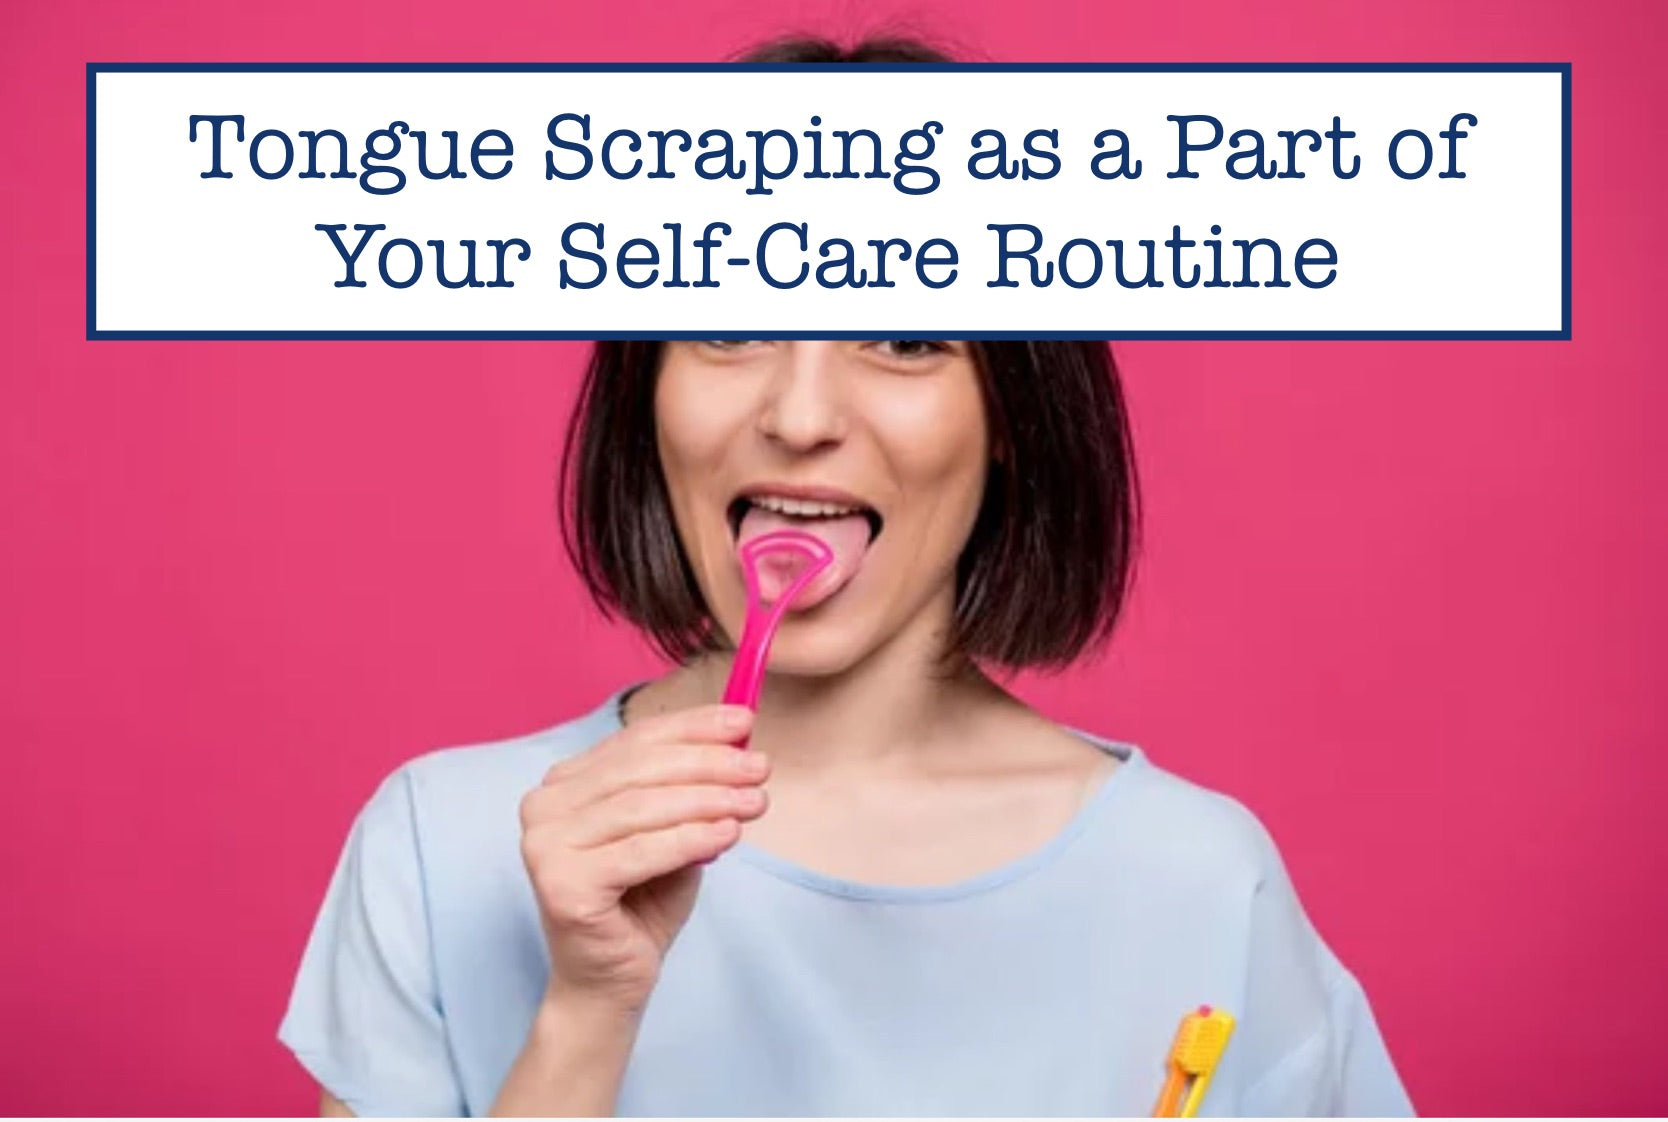 Tongue Scraping as a Part of Your Self-Care Routine